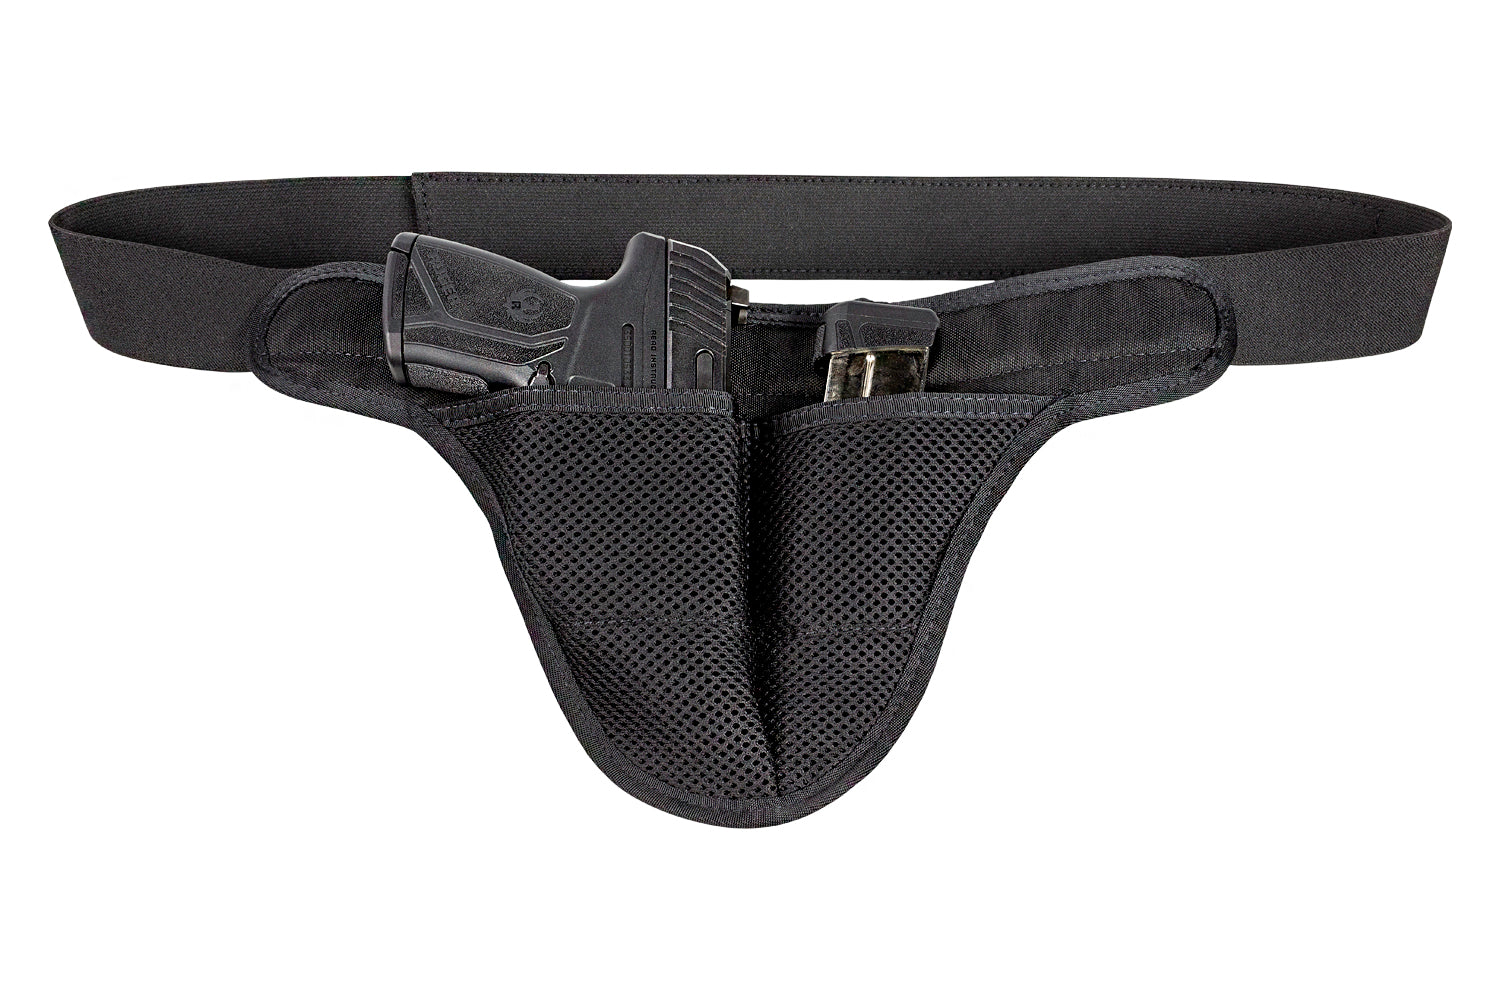 Crotch Carry Holster for small to large handguns.